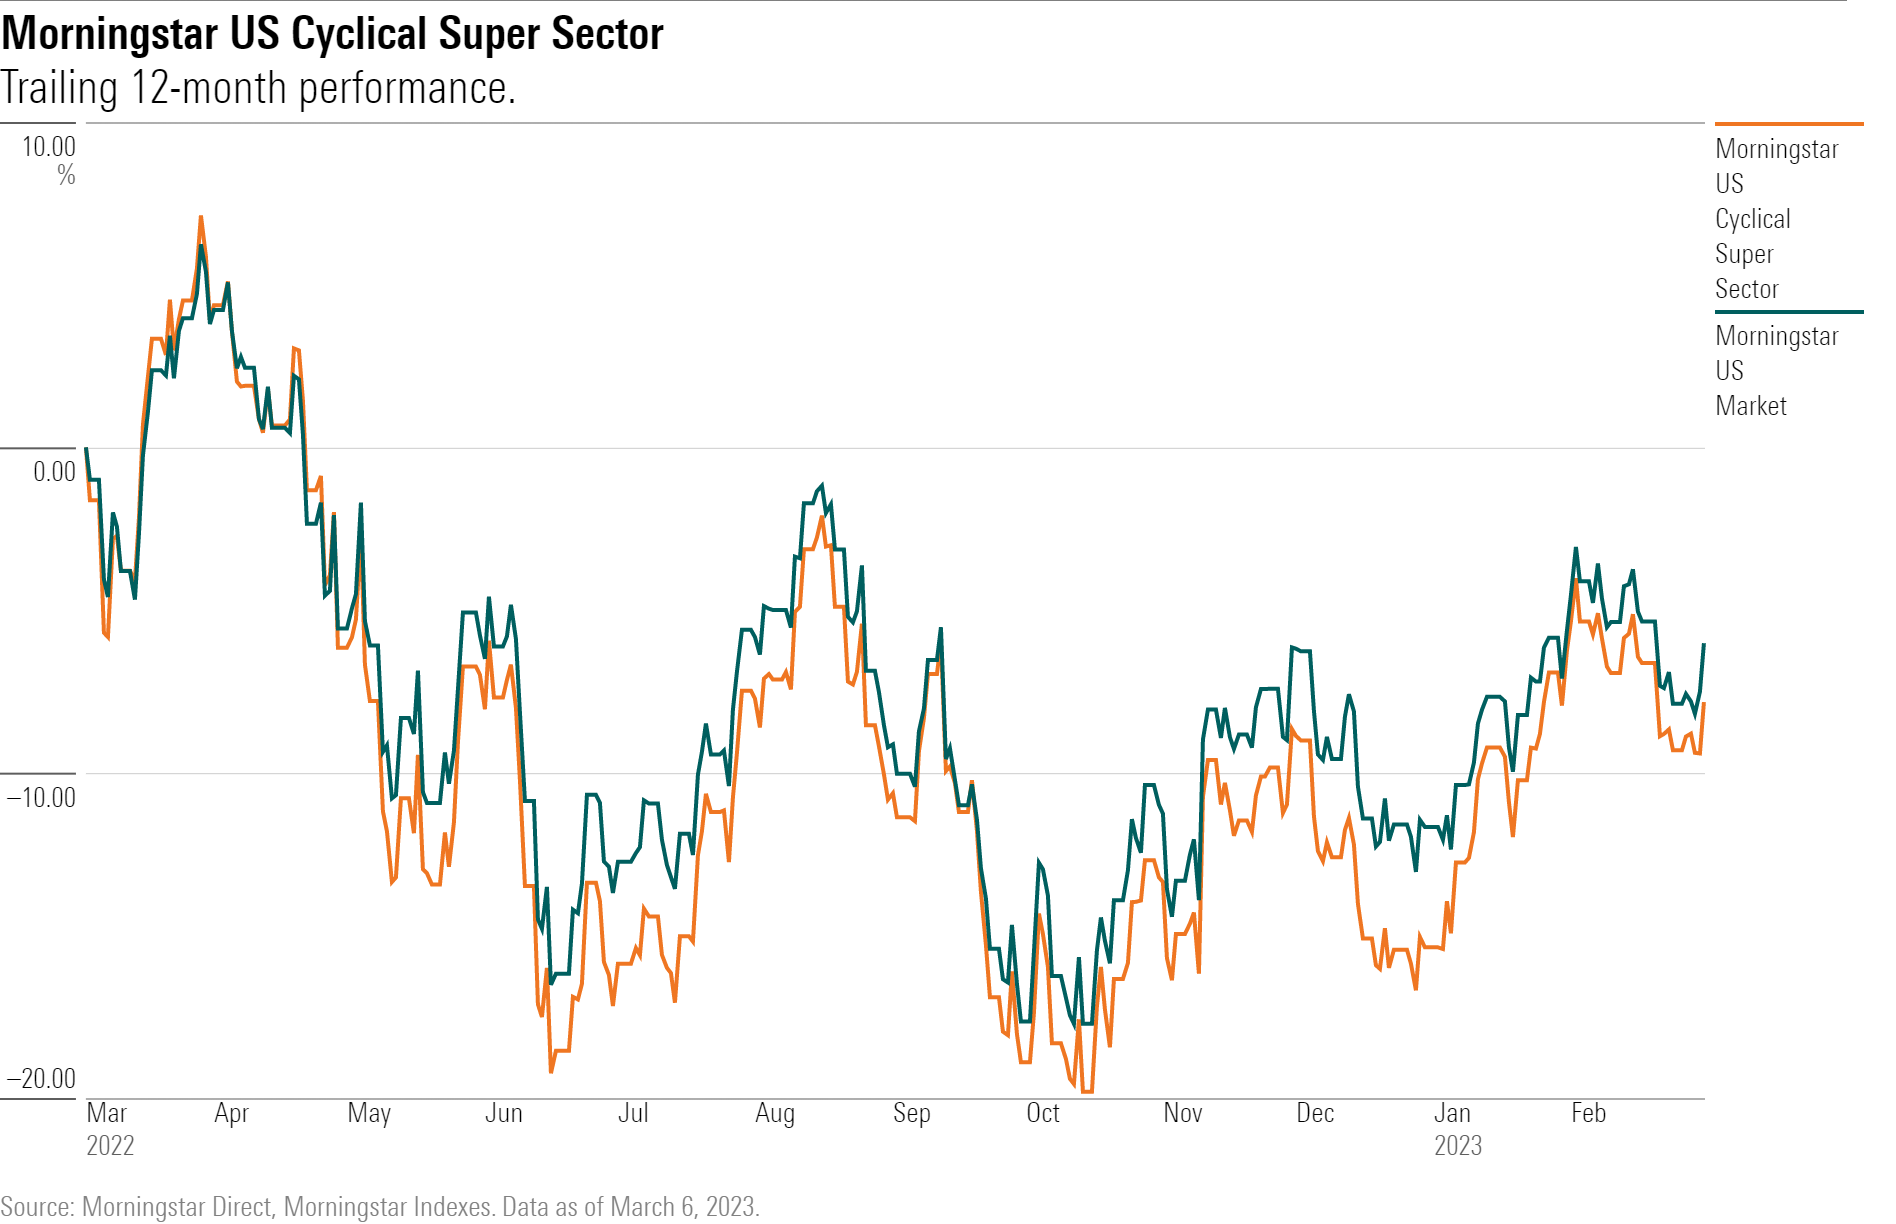 Line graph showing trailing 12-month performance for the Morningstar US Cyclical Super Sector Index and the Morningstar US Market Index for March 2022-March 2023.